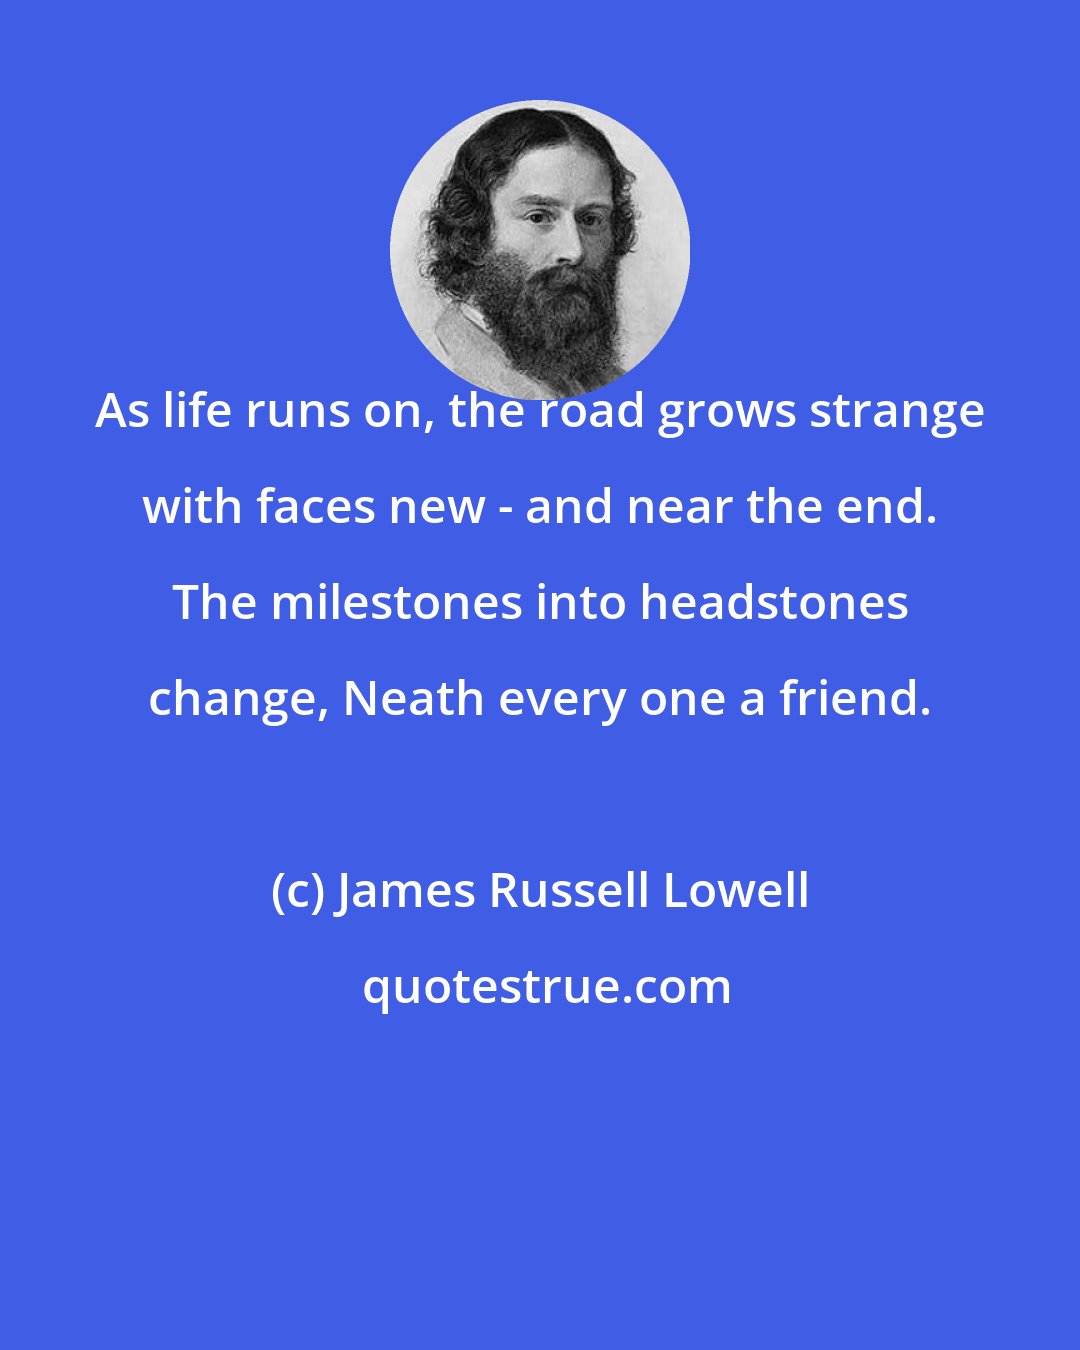 James Russell Lowell: As life runs on, the road grows strange with faces new - and near the end. The milestones into headstones change, Neath every one a friend.